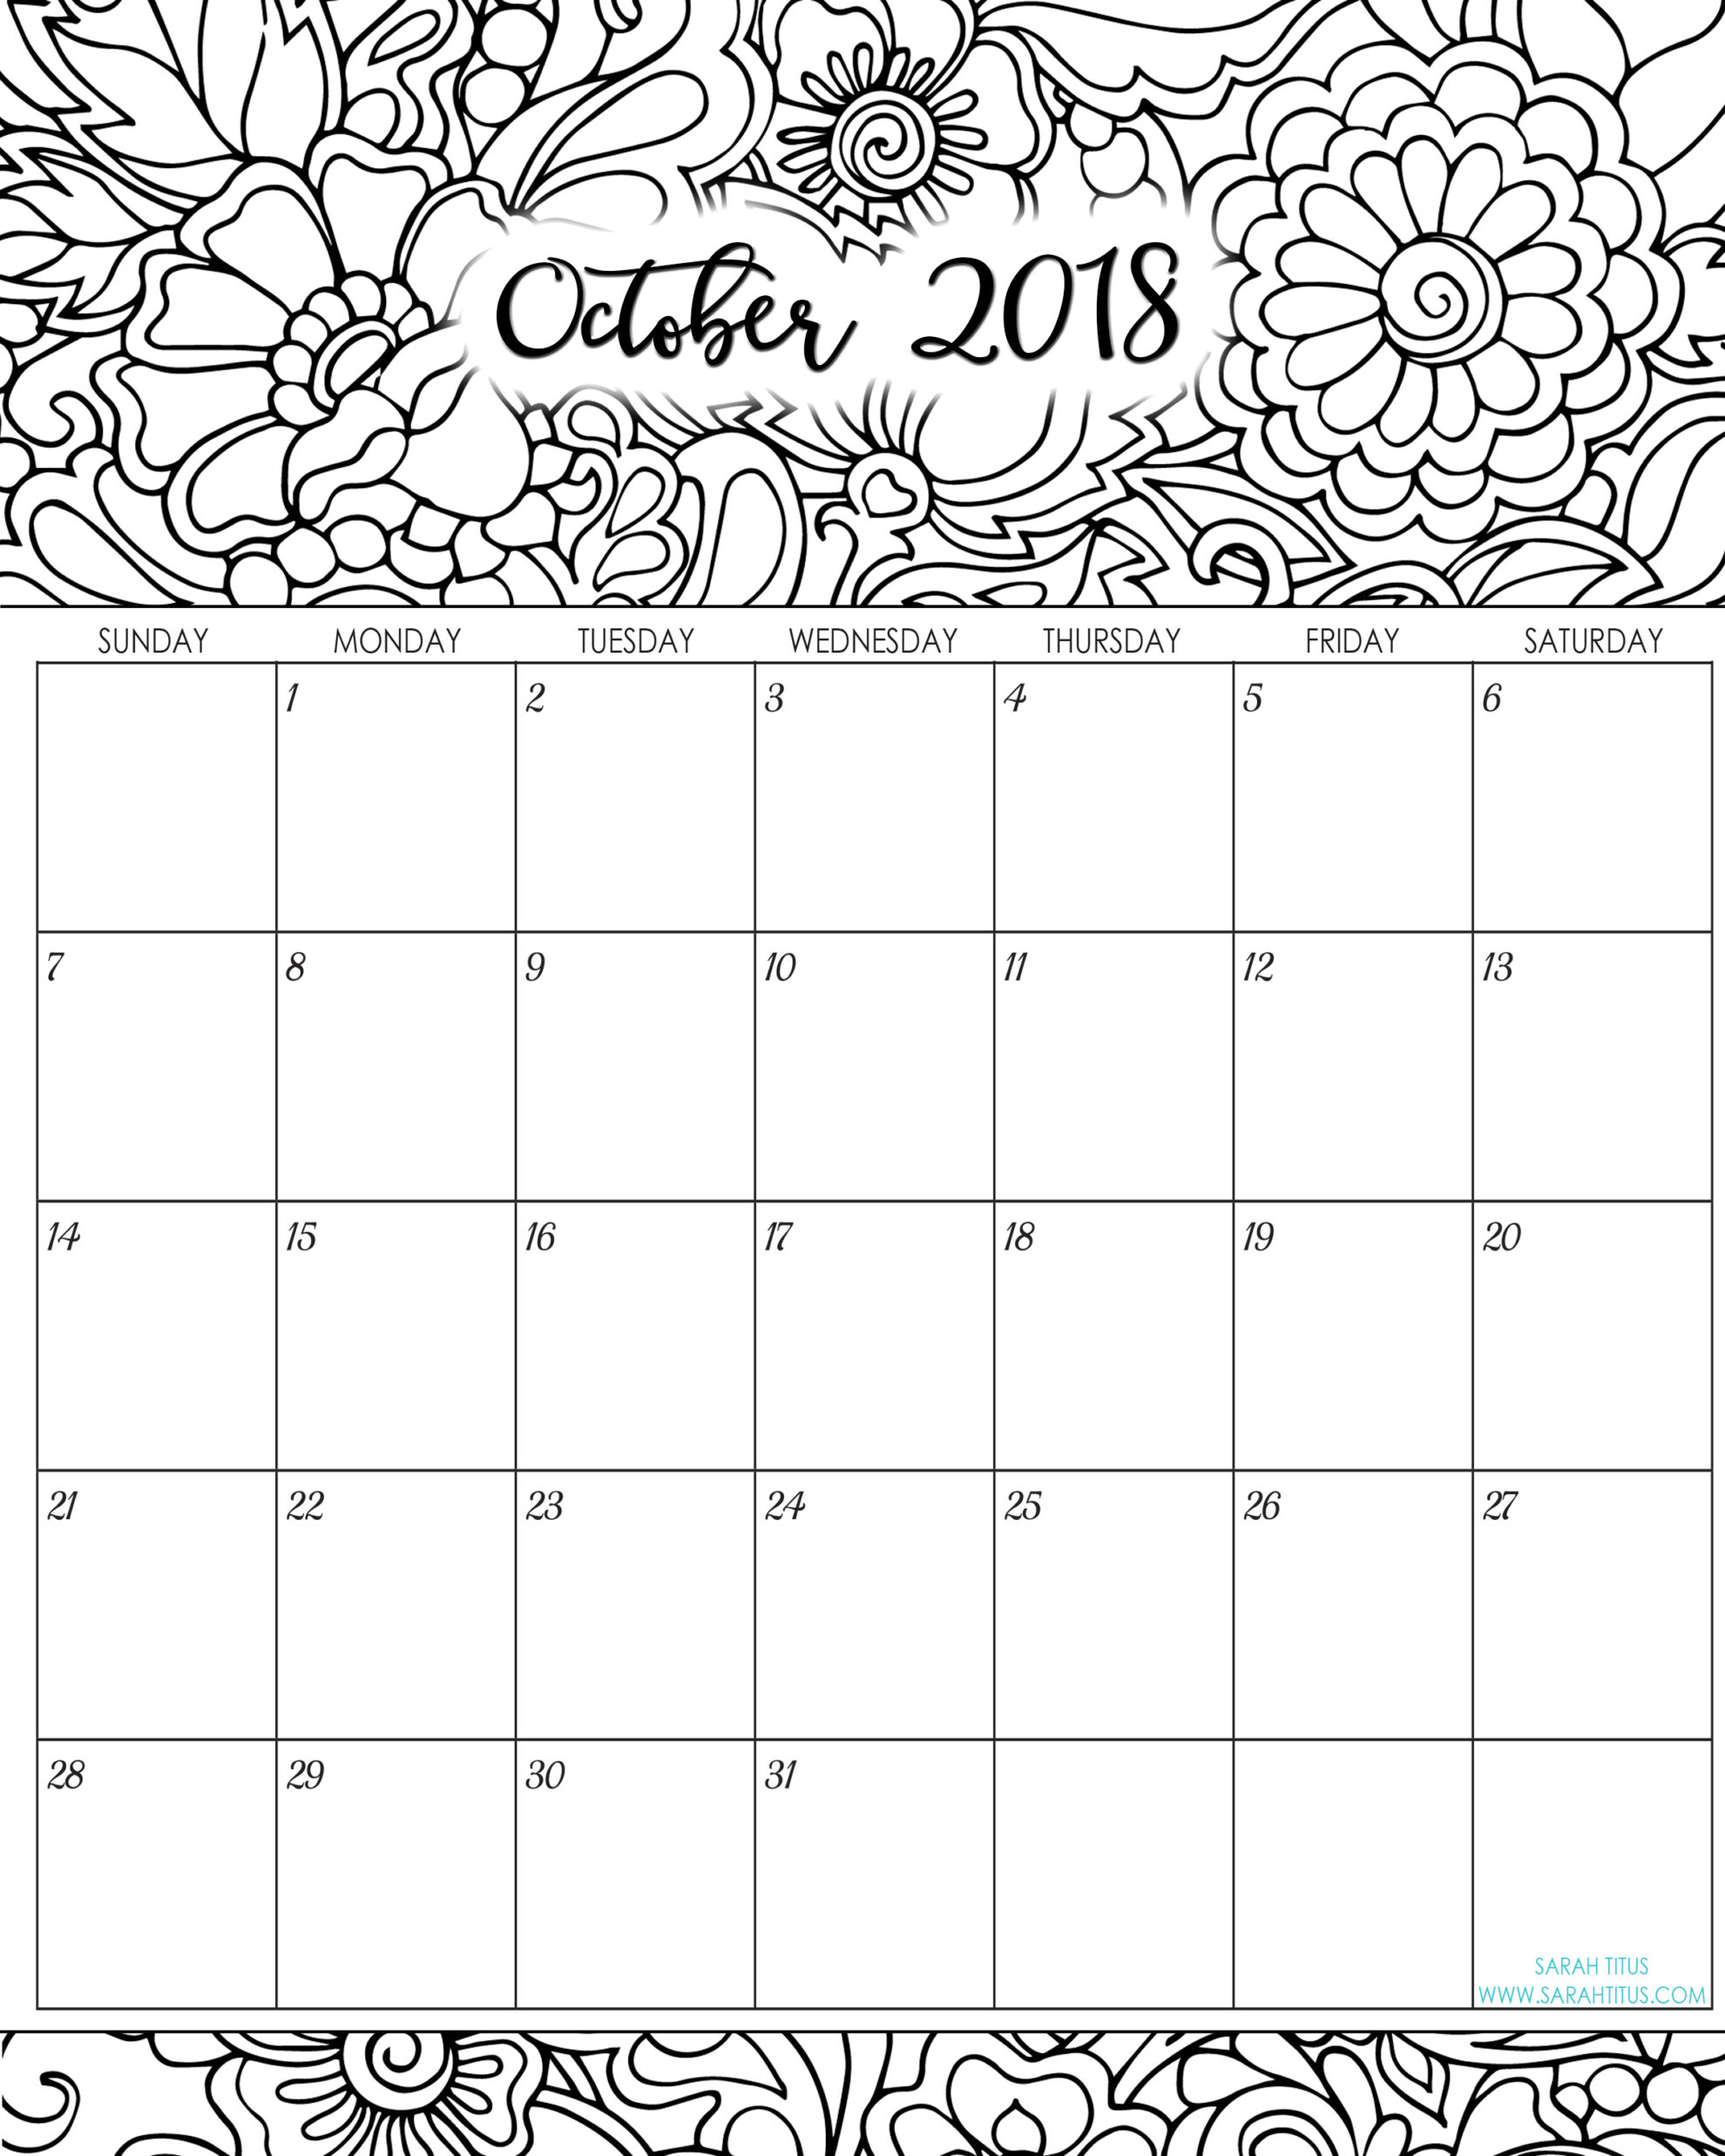 It had just been a stressful week for me. What better thing to color than a calendar! As I was coloring, I found it so relaxing. Before I knew it, my stress had melted away and I was calm. #2018freeprintablecalendars #2018monthlycalendars #2018calendars #freeprintables